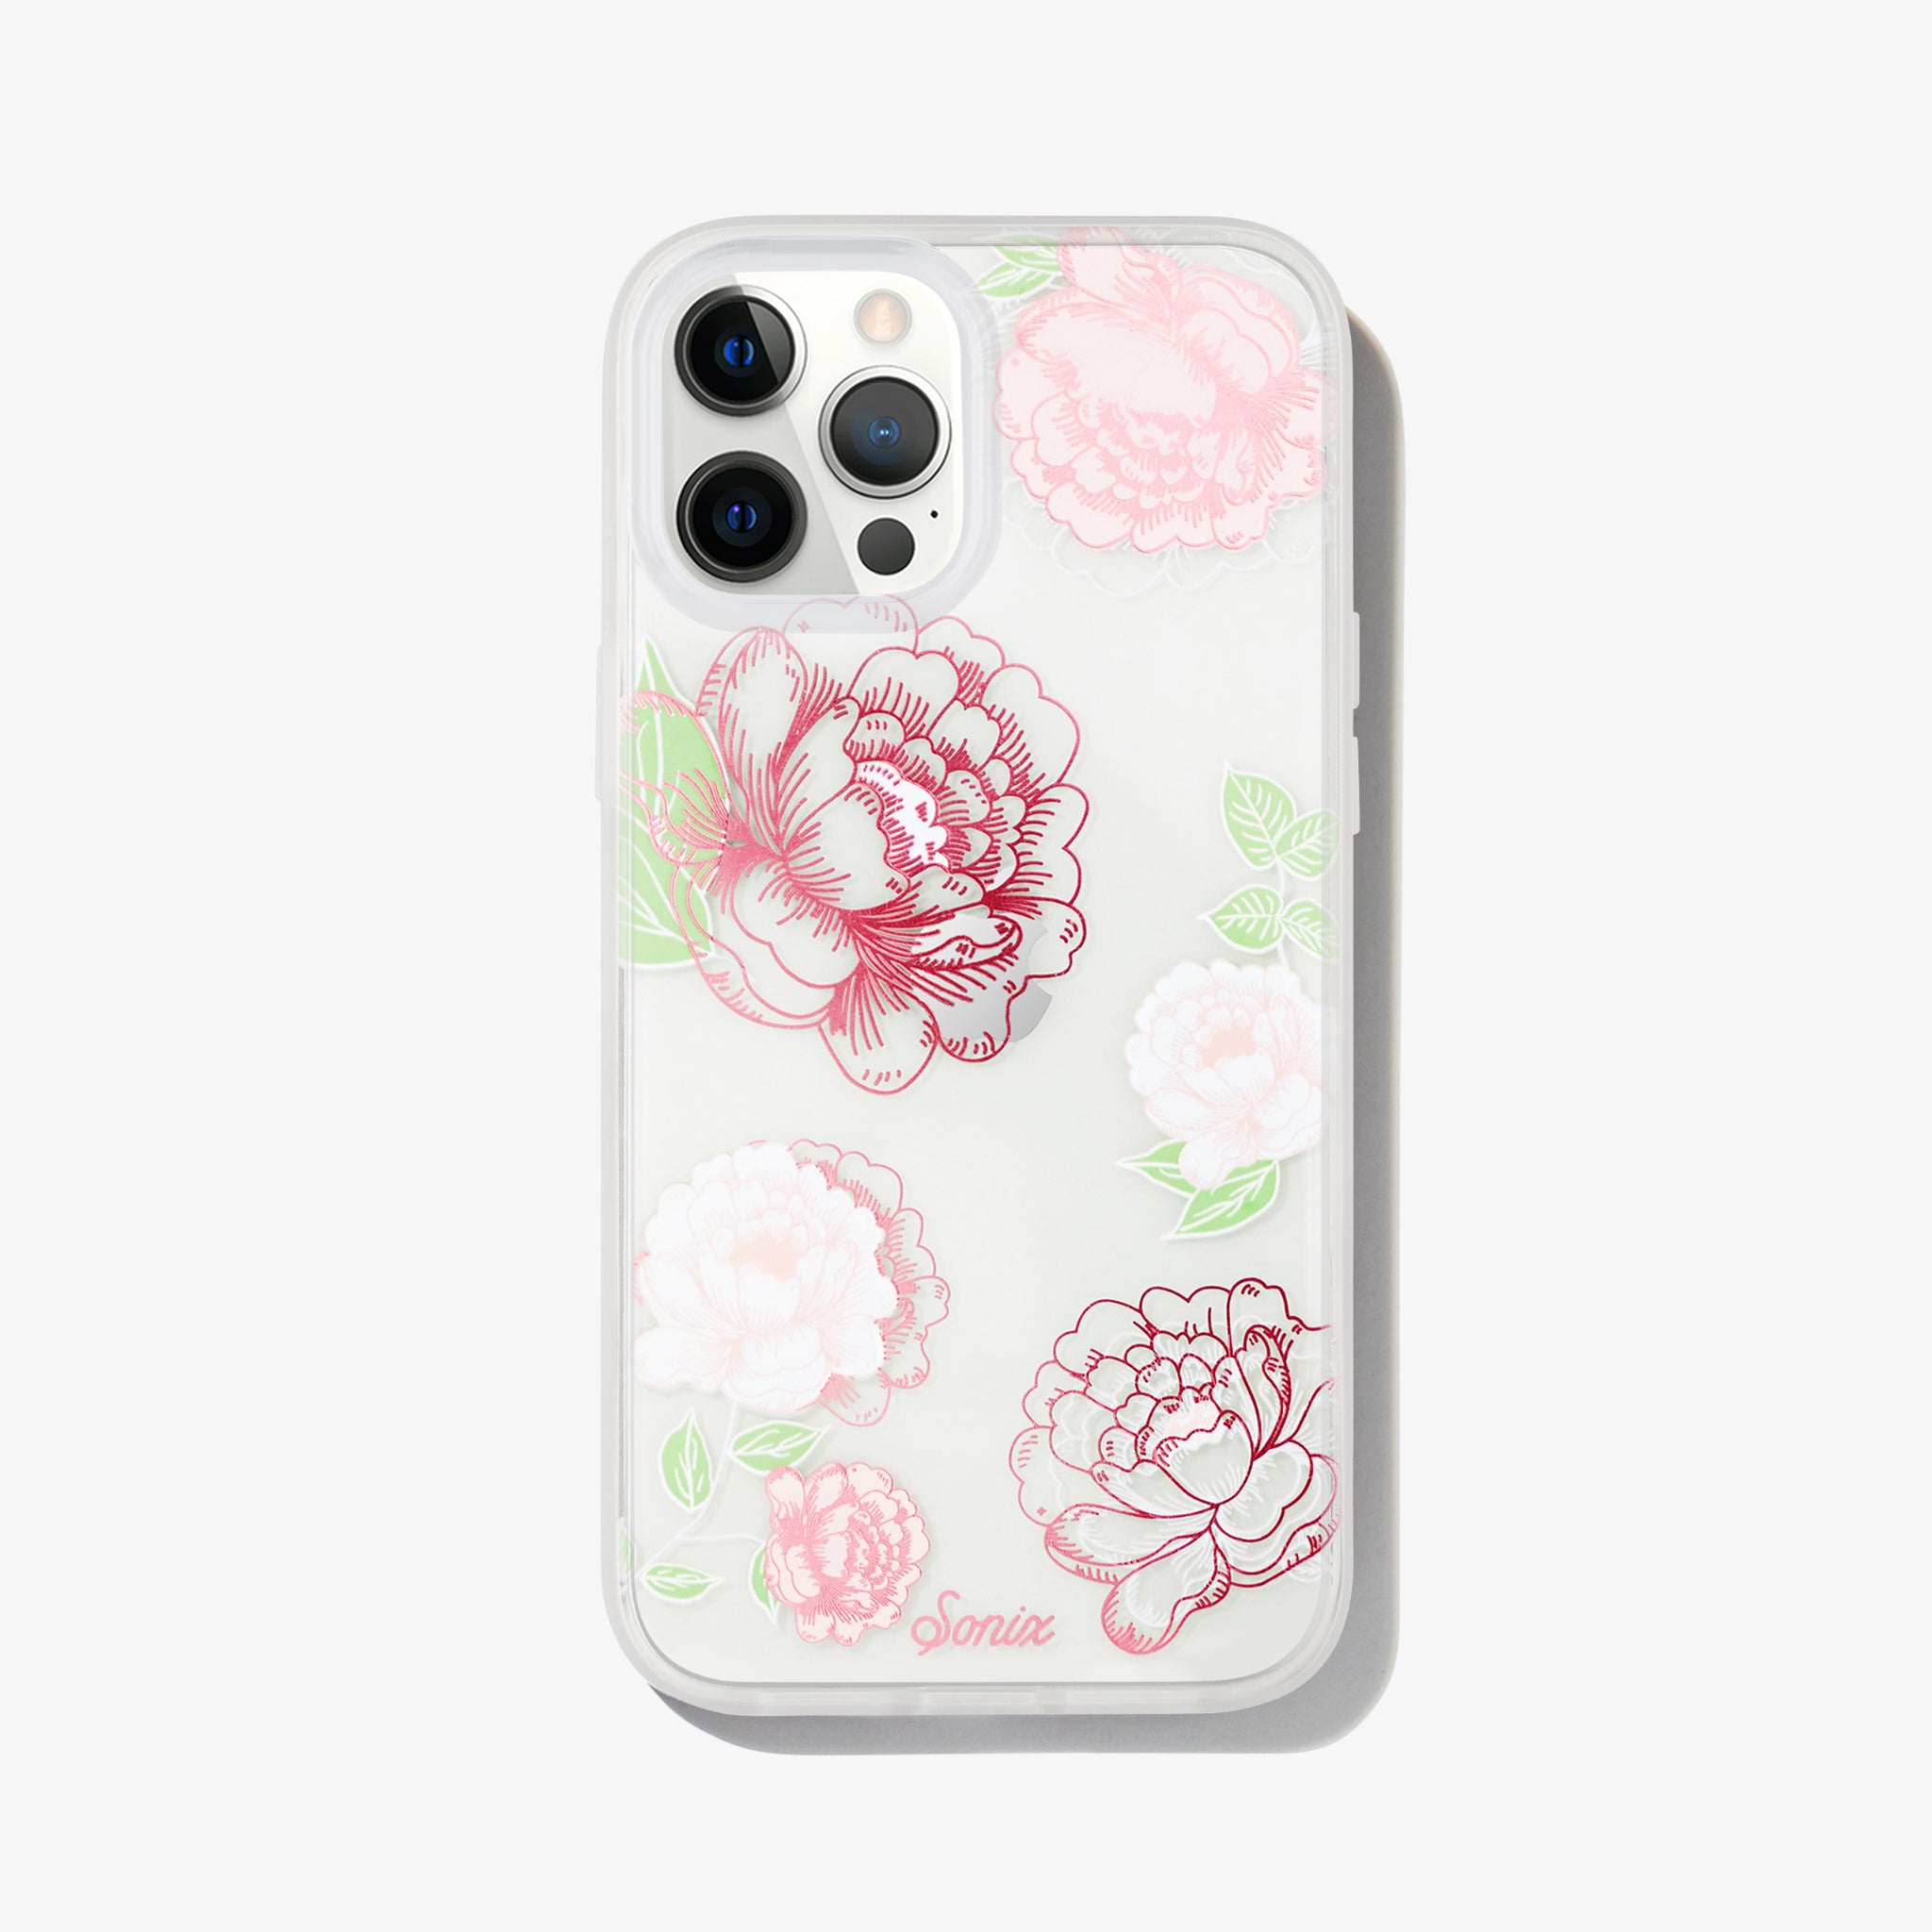 delicate pink and white roses, finished with pink foiling shown on an iphone 12 pro